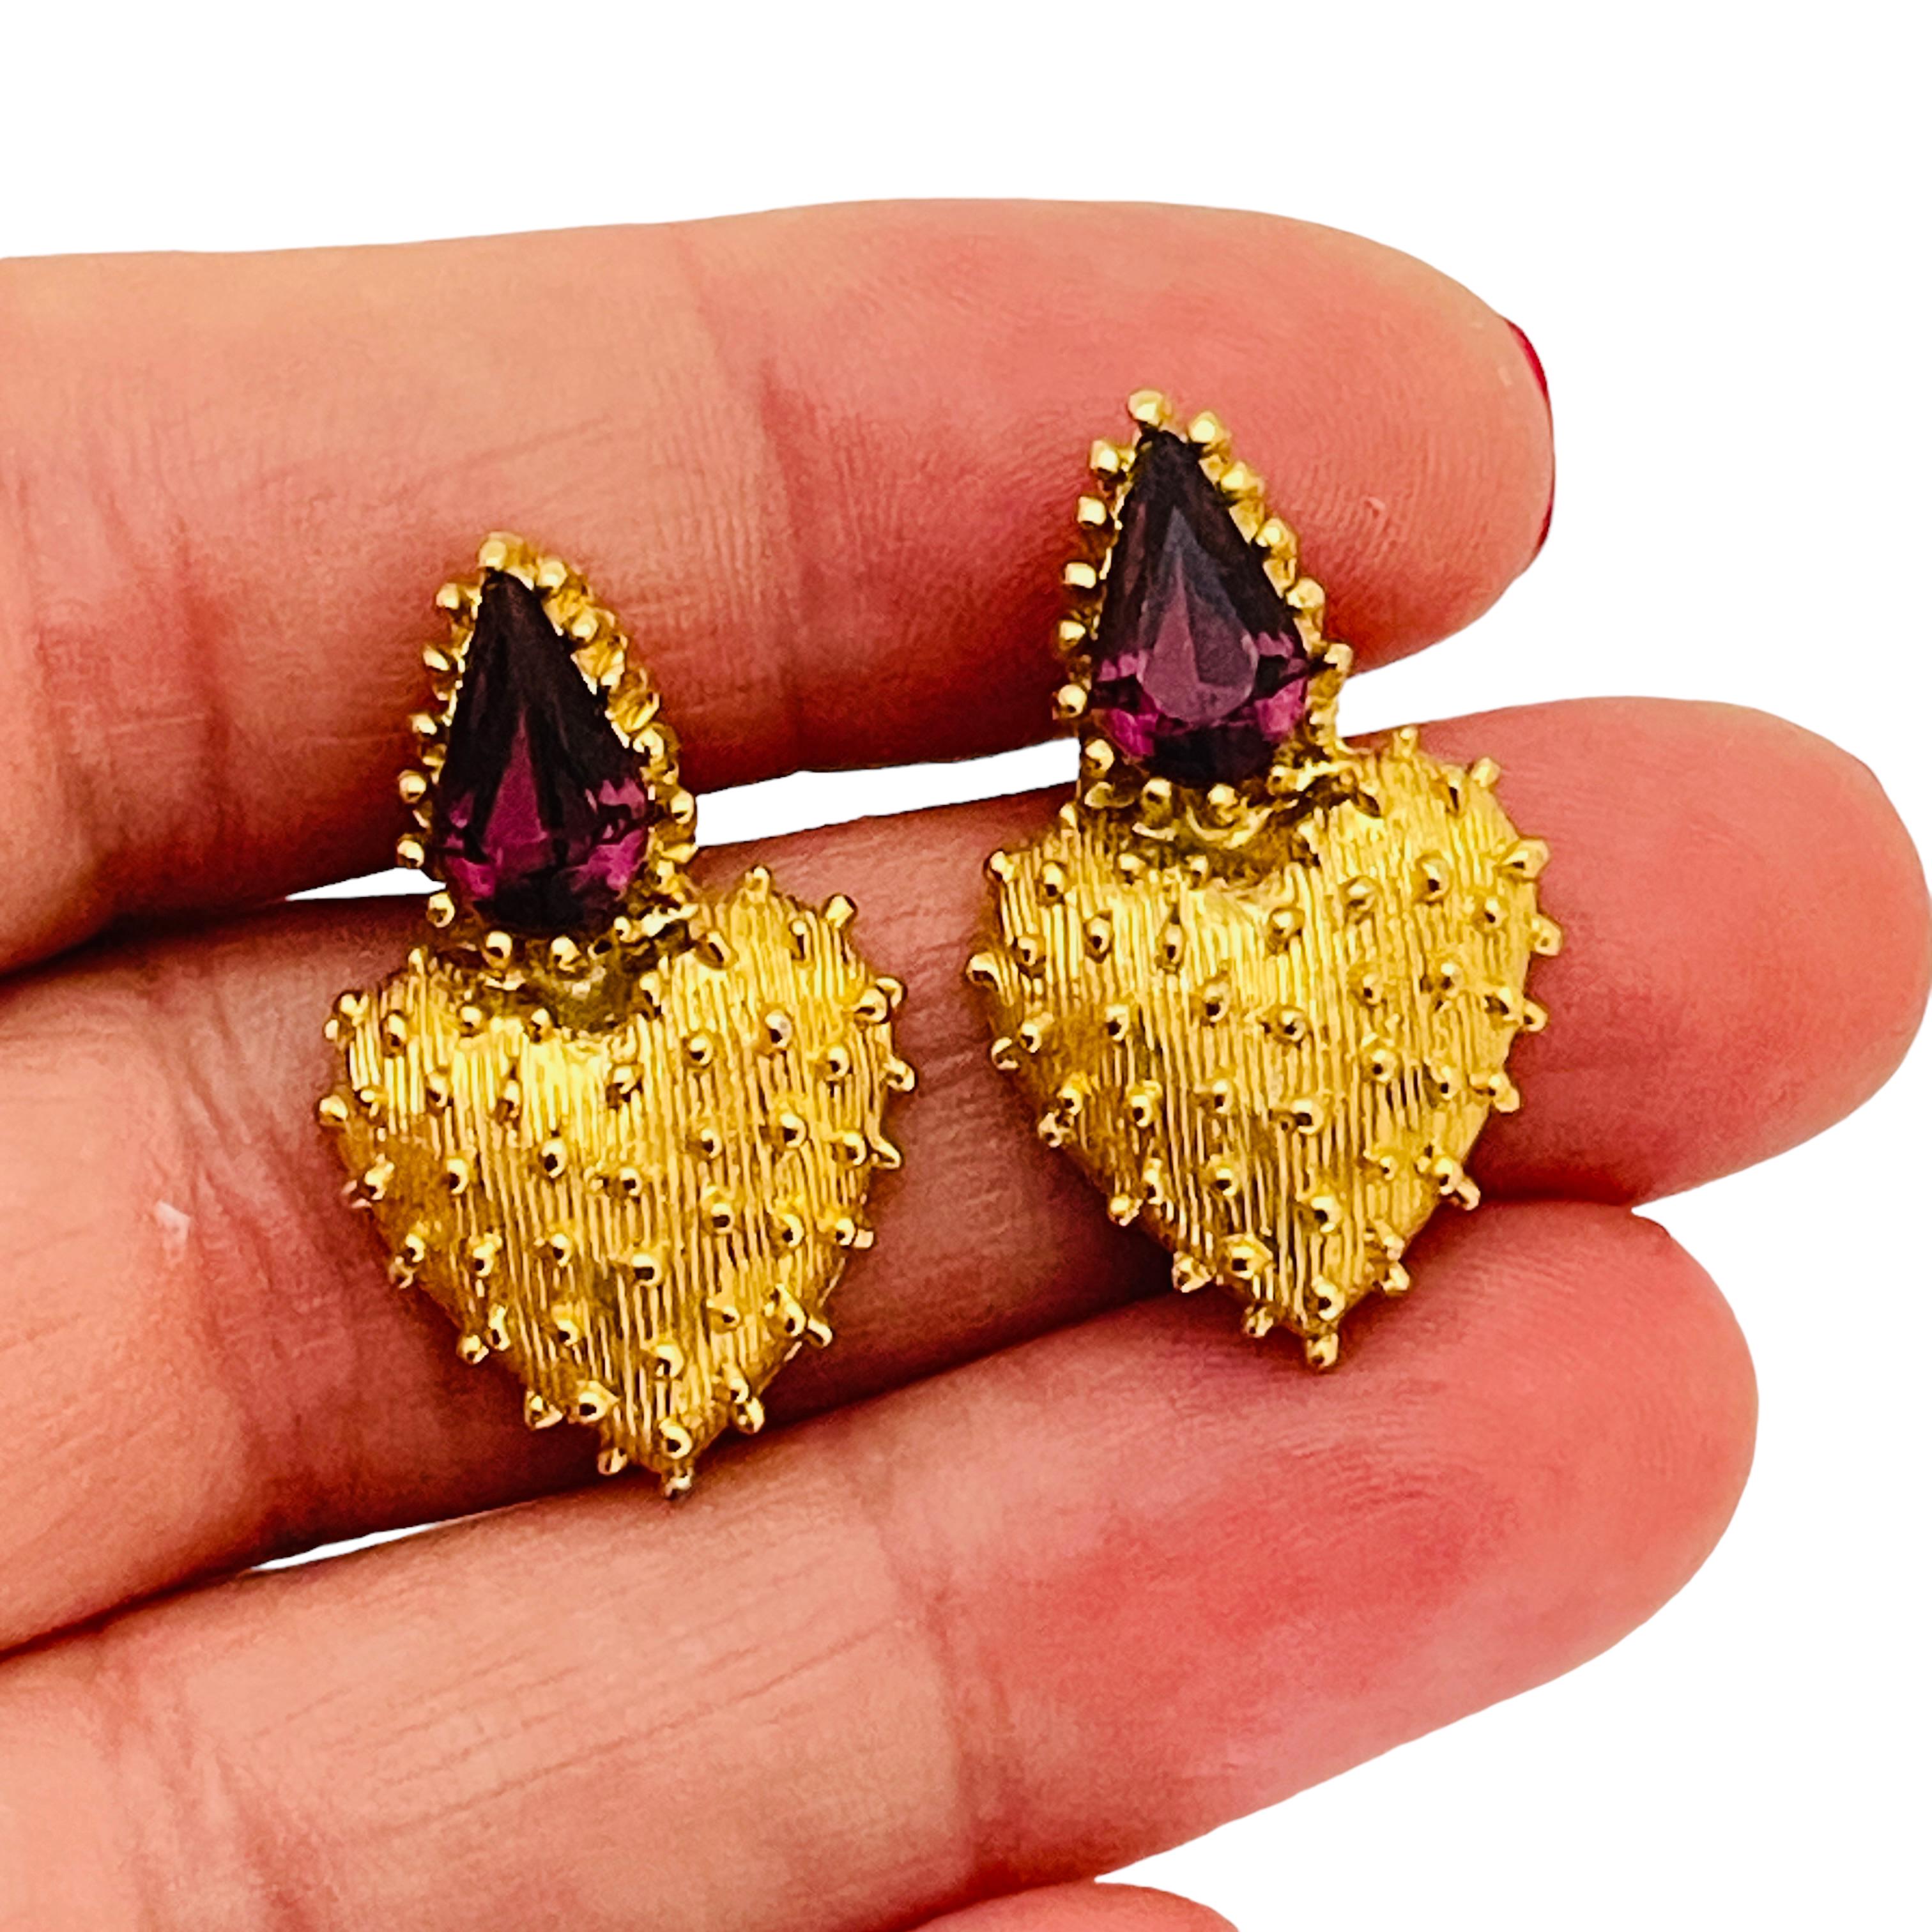 Vintage gold glass amethyst pierced 80’s earrings   In Excellent Condition For Sale In Palos Hills, IL